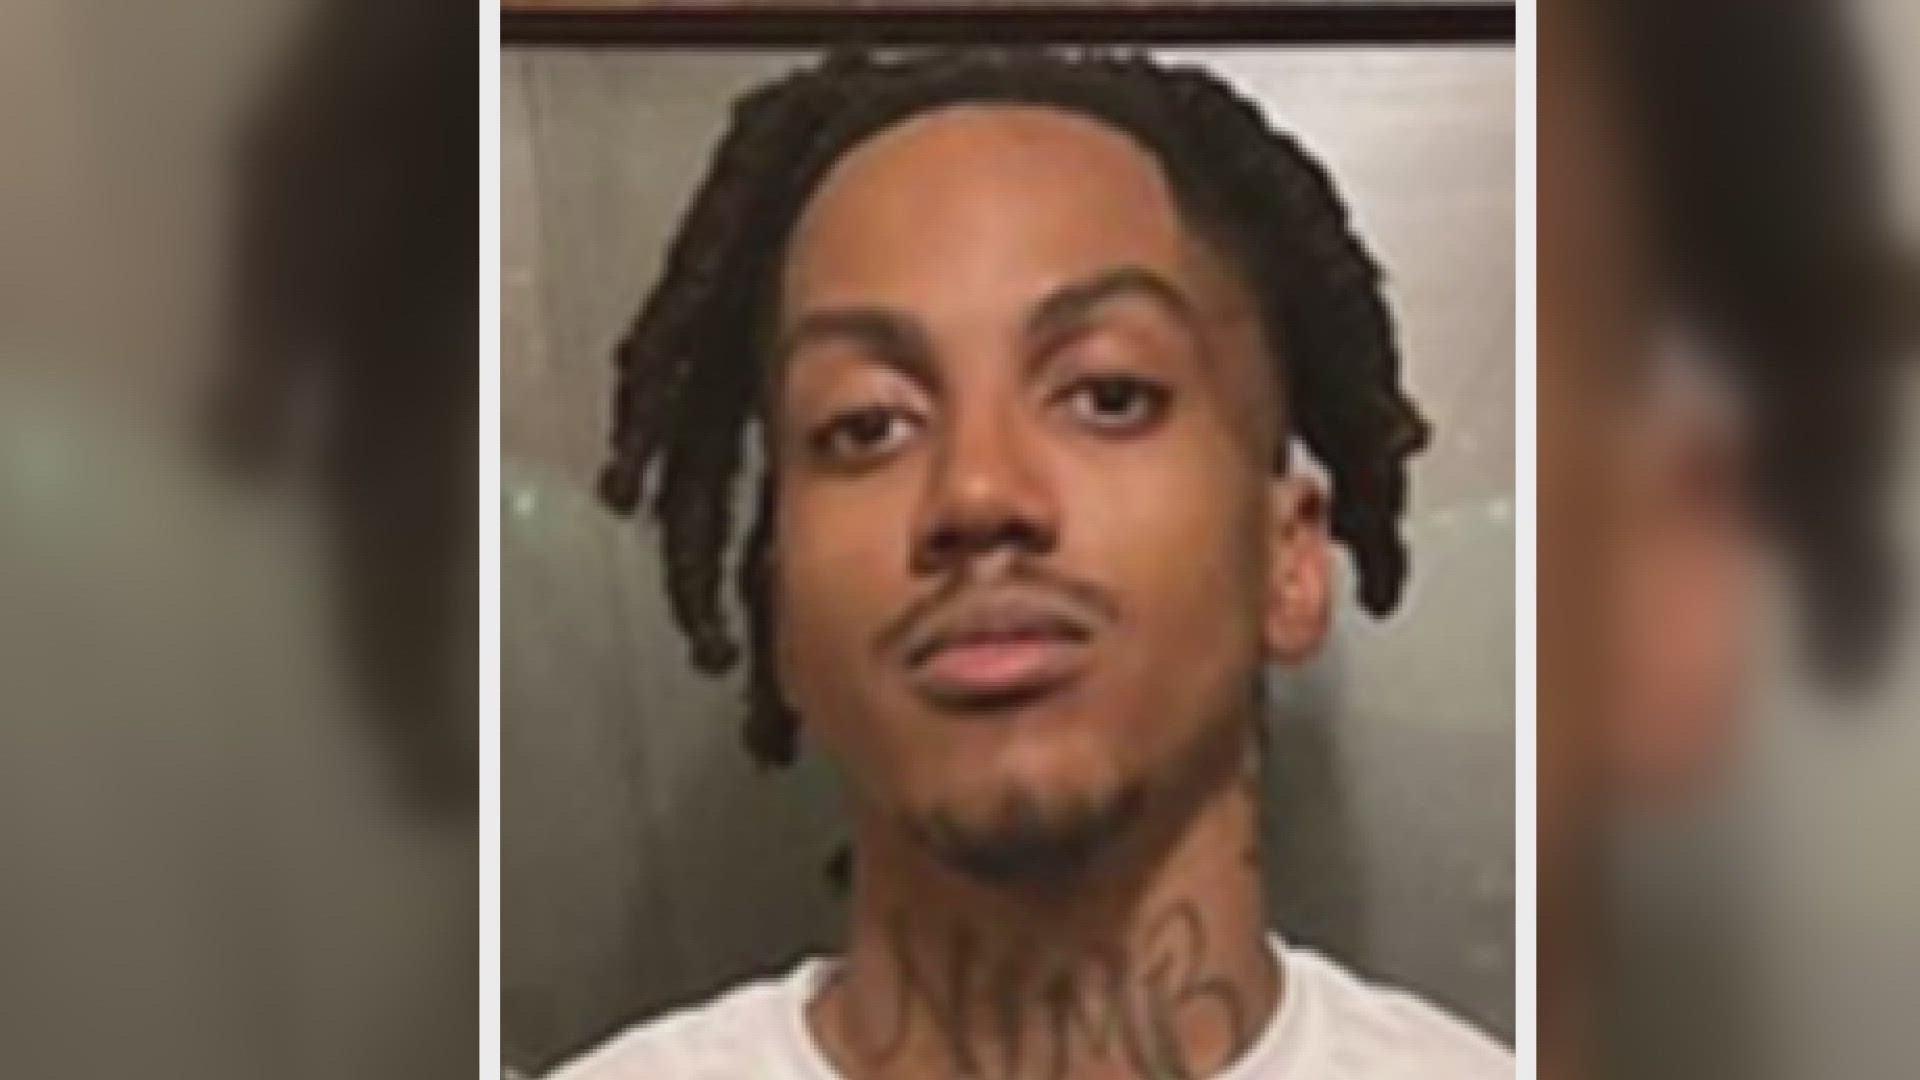 Crime Stoppers is offering a $5,000 reward for information leading to the capture Damien Matthews. Nathaniel Rush was arrested Monday afternoon.